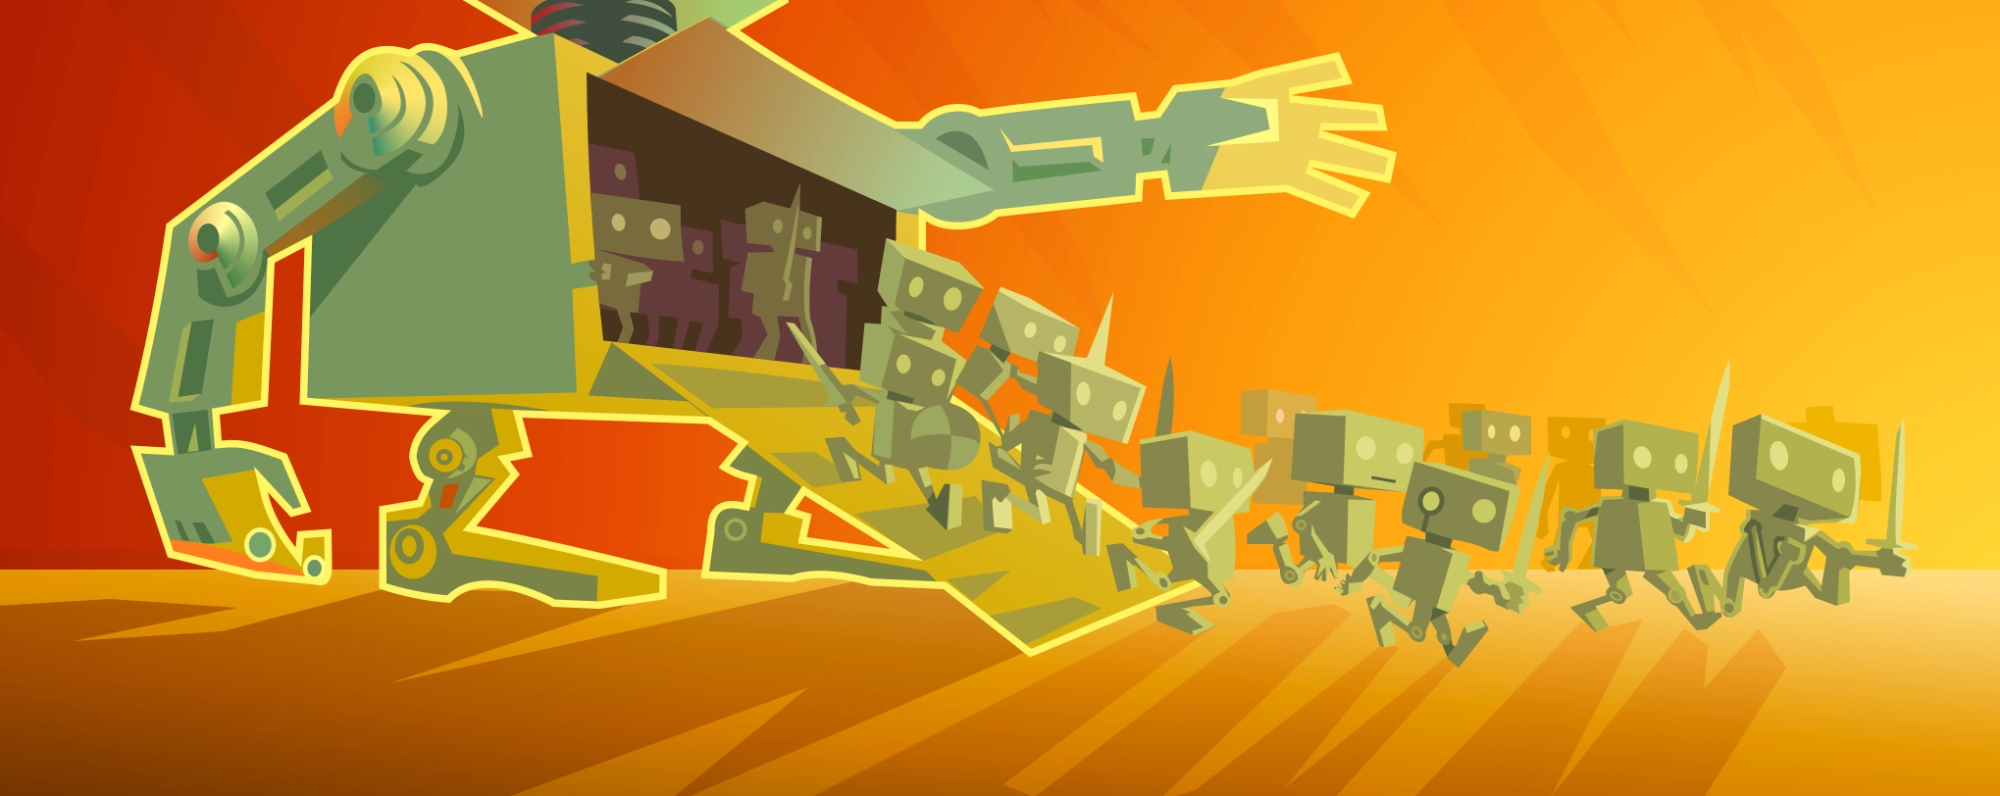 Robots going into battle: They are carrying swords and come flooding out of the belley, down a ramp of a huge robot-behemoth who is holding out its arm like an order to attack. The background is in red and orange as if on fire.